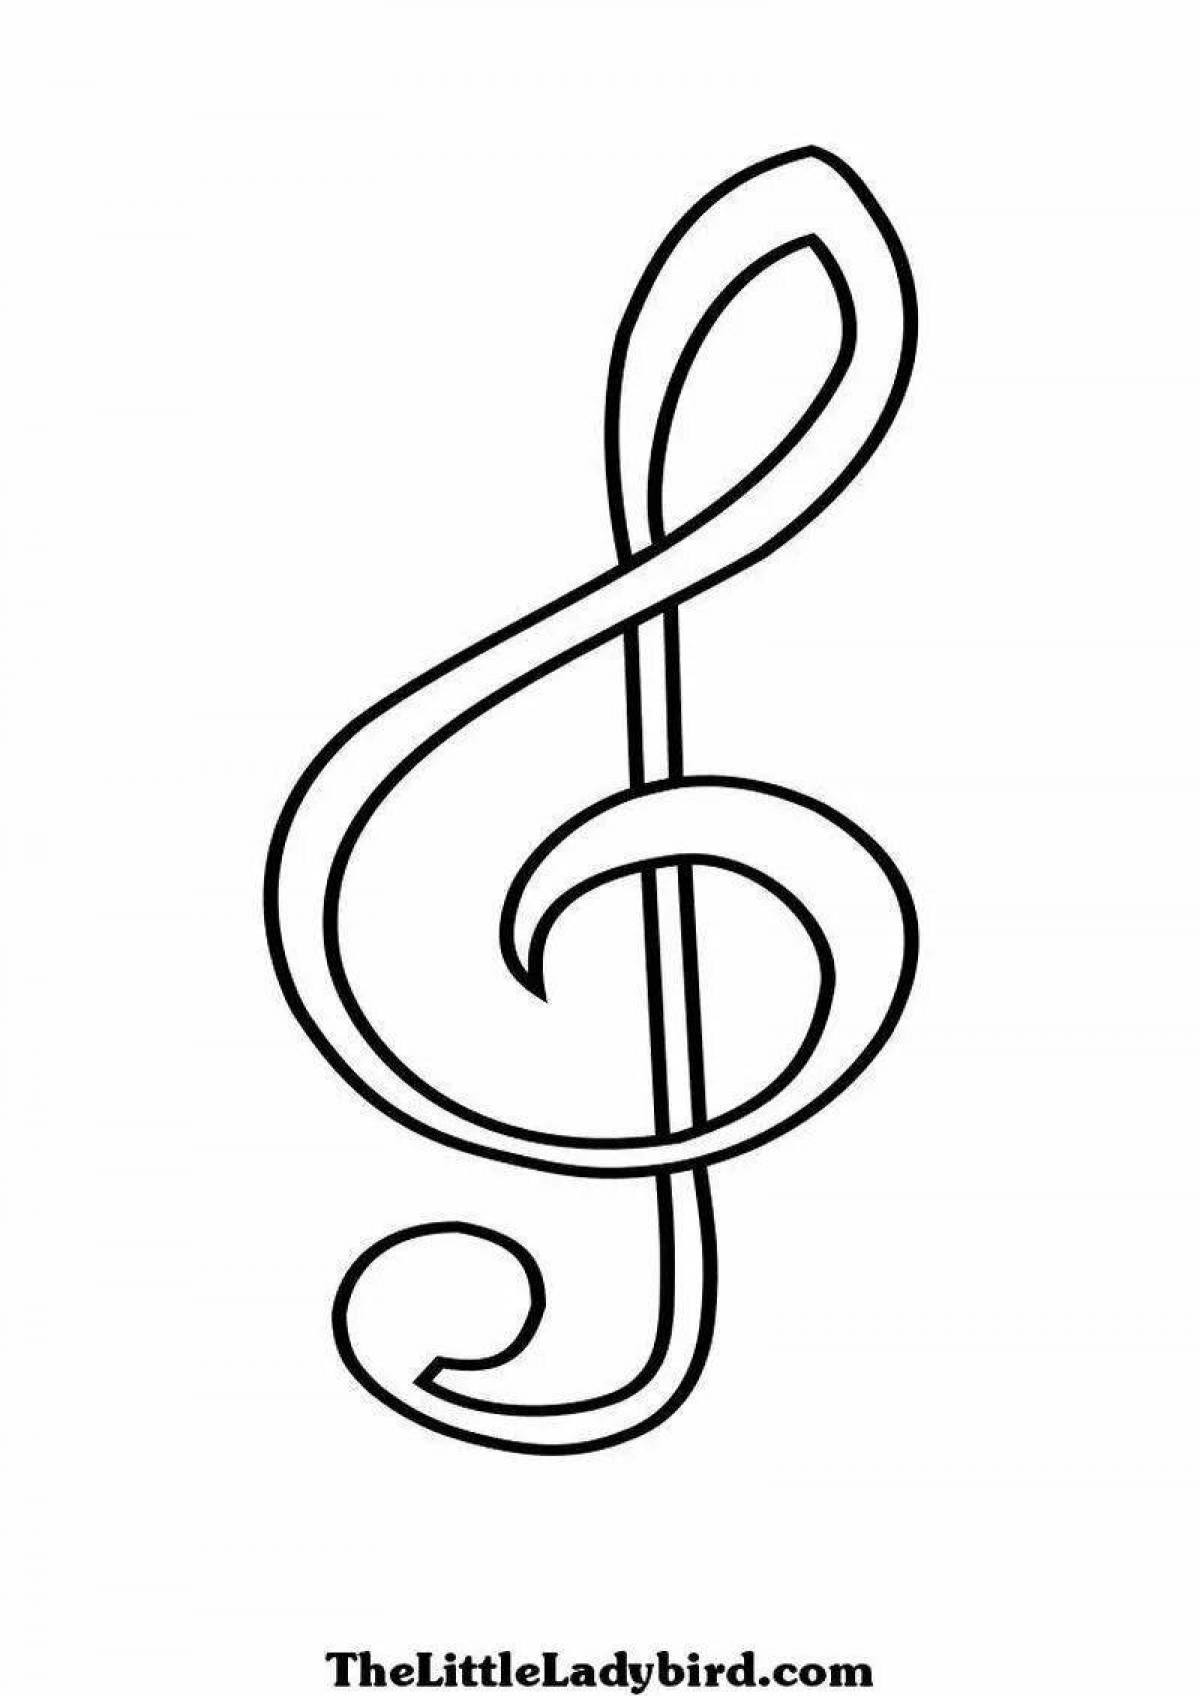 Merry musical note coloring book